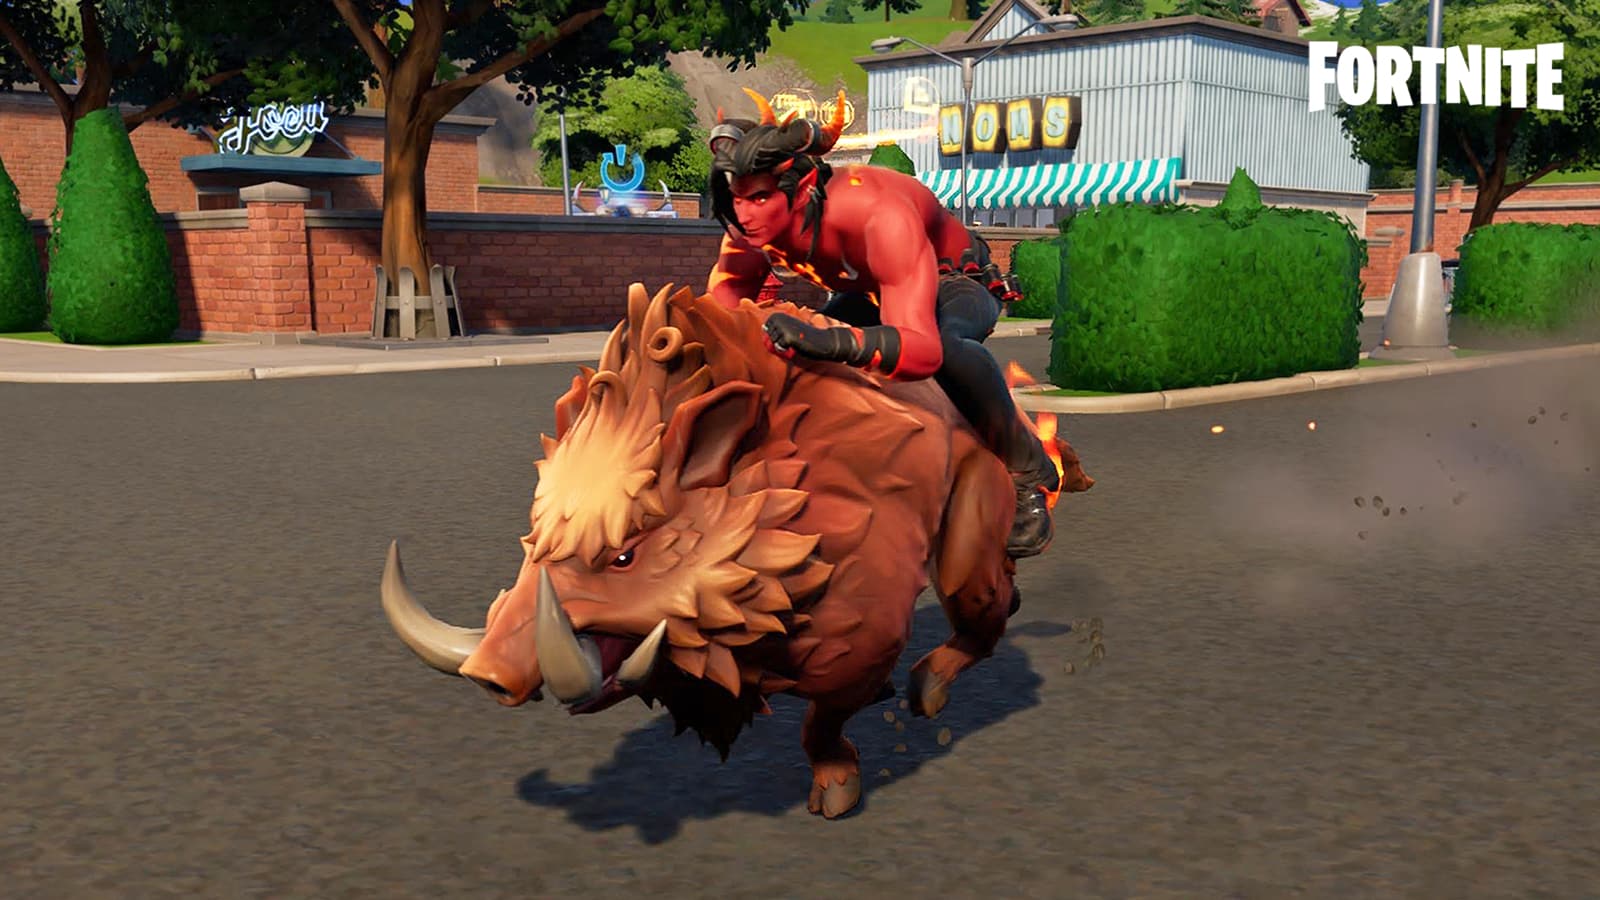 A Fortnite player riding a boar